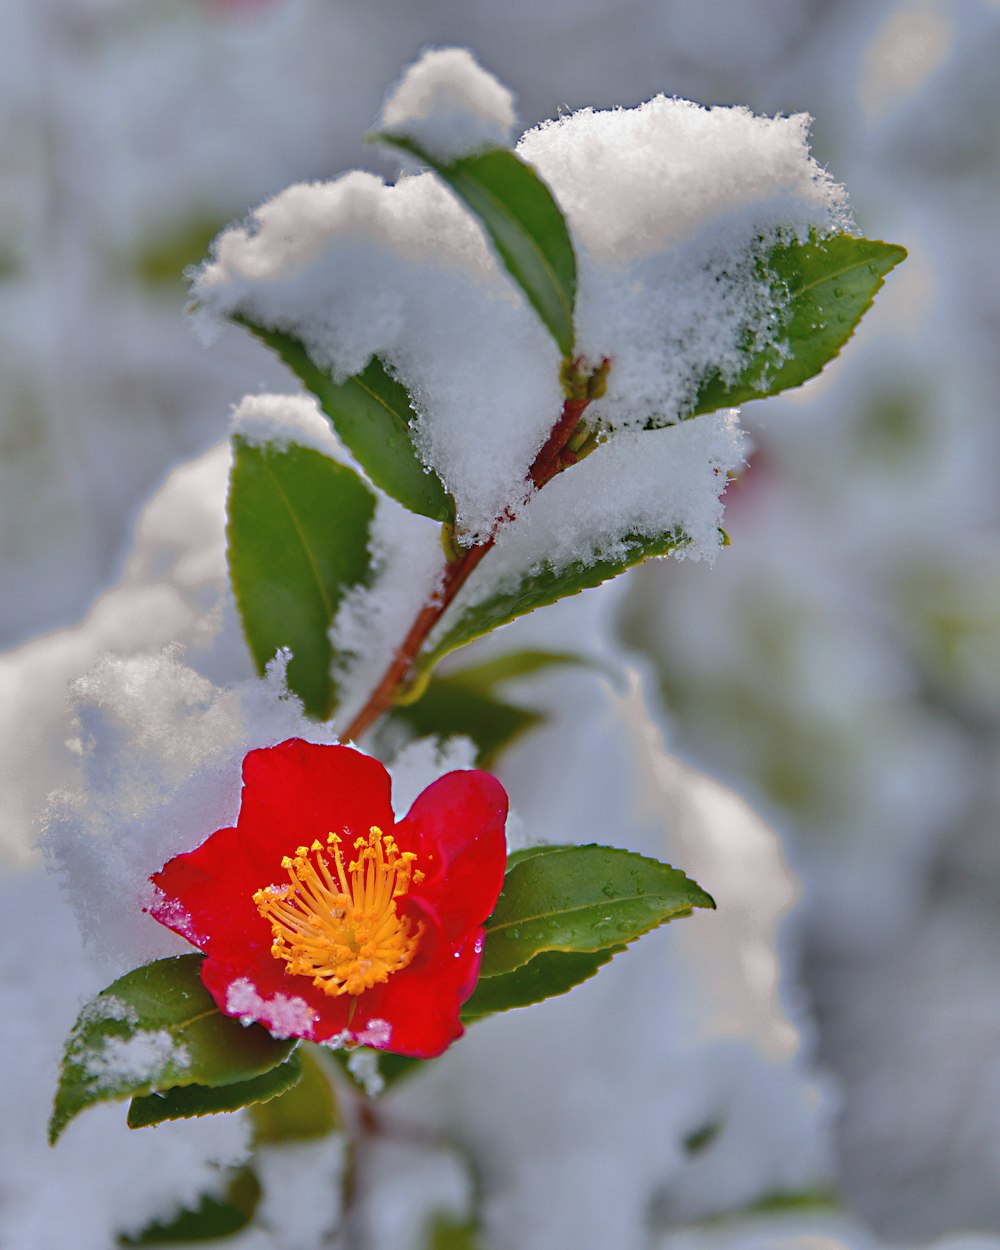 a red flower with a yellow center surrounded by snow